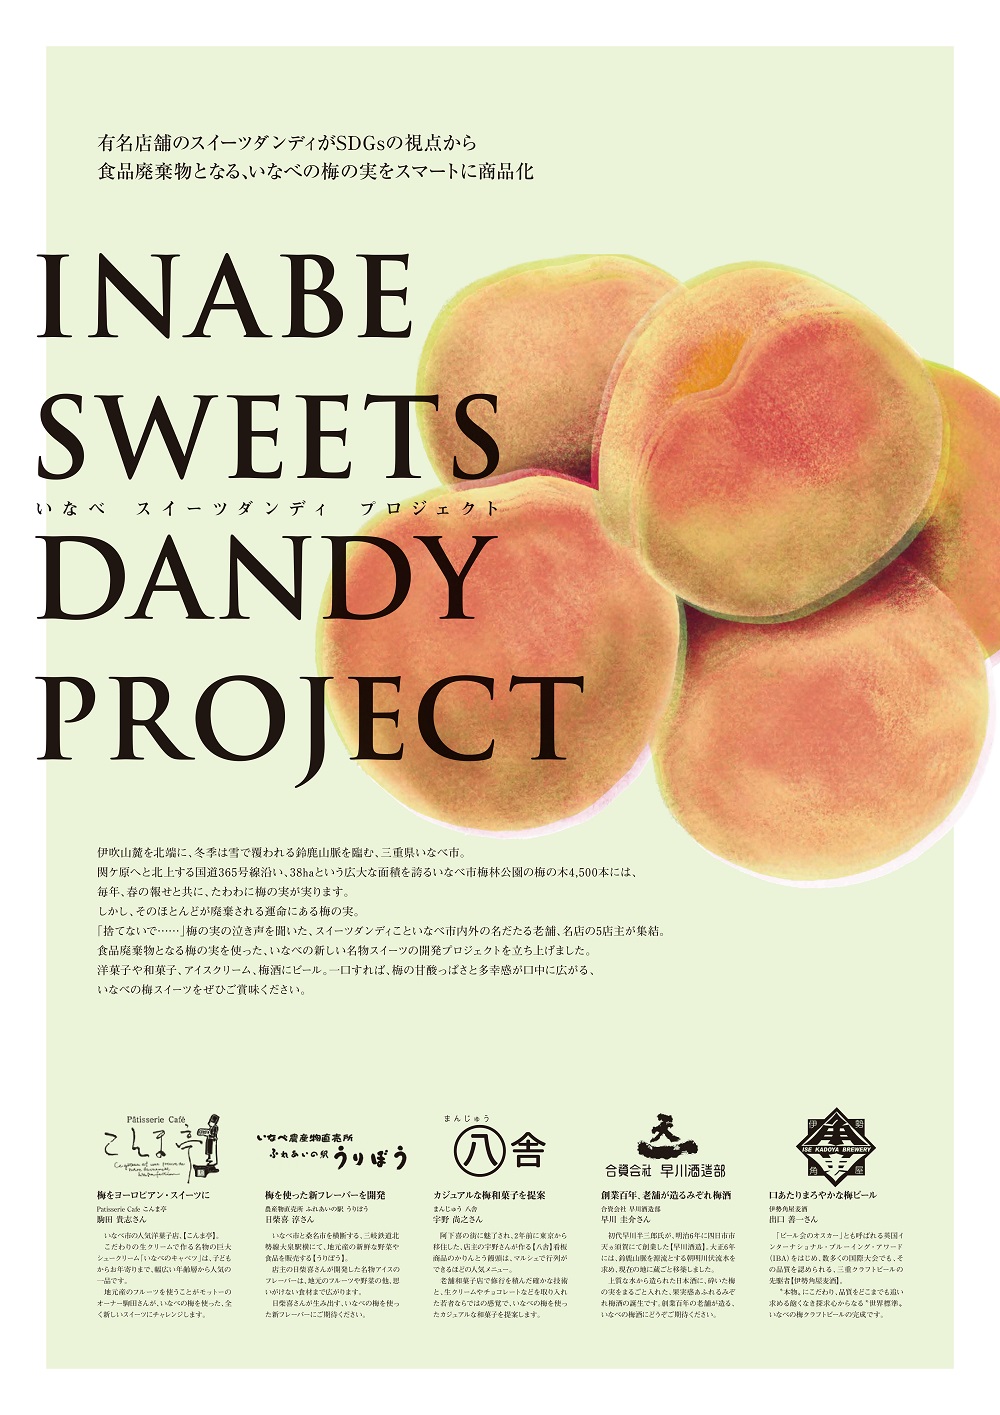 INABE UME DANDY PROJECT